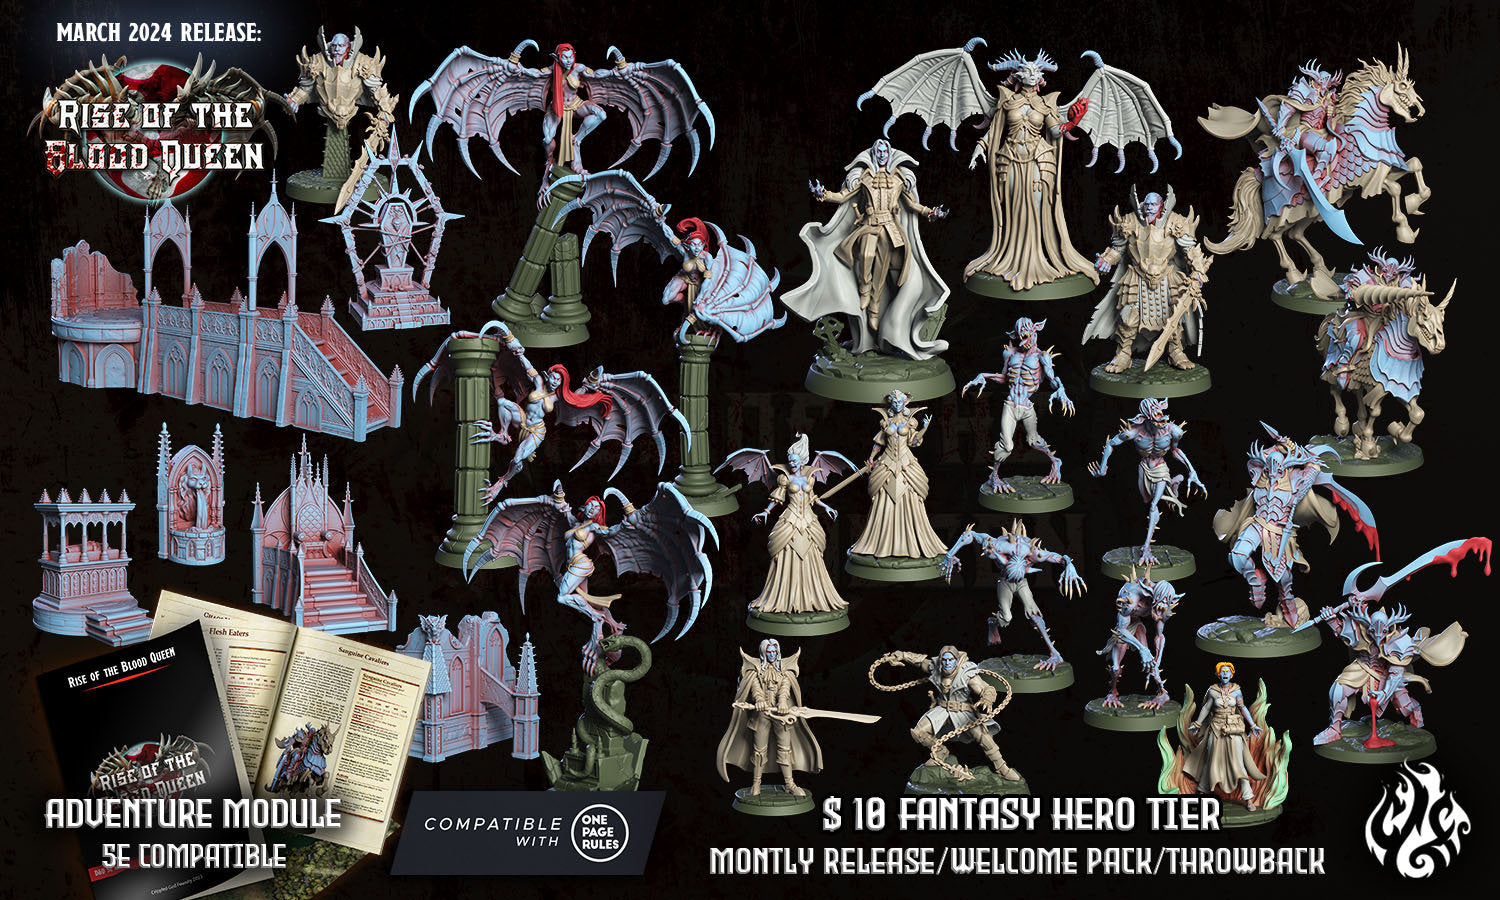 Flesh Eaters - Crippled God Foundry | 32mm | Rise of The Blood Queen | Ghoul | Zombie | Vampire Spawn